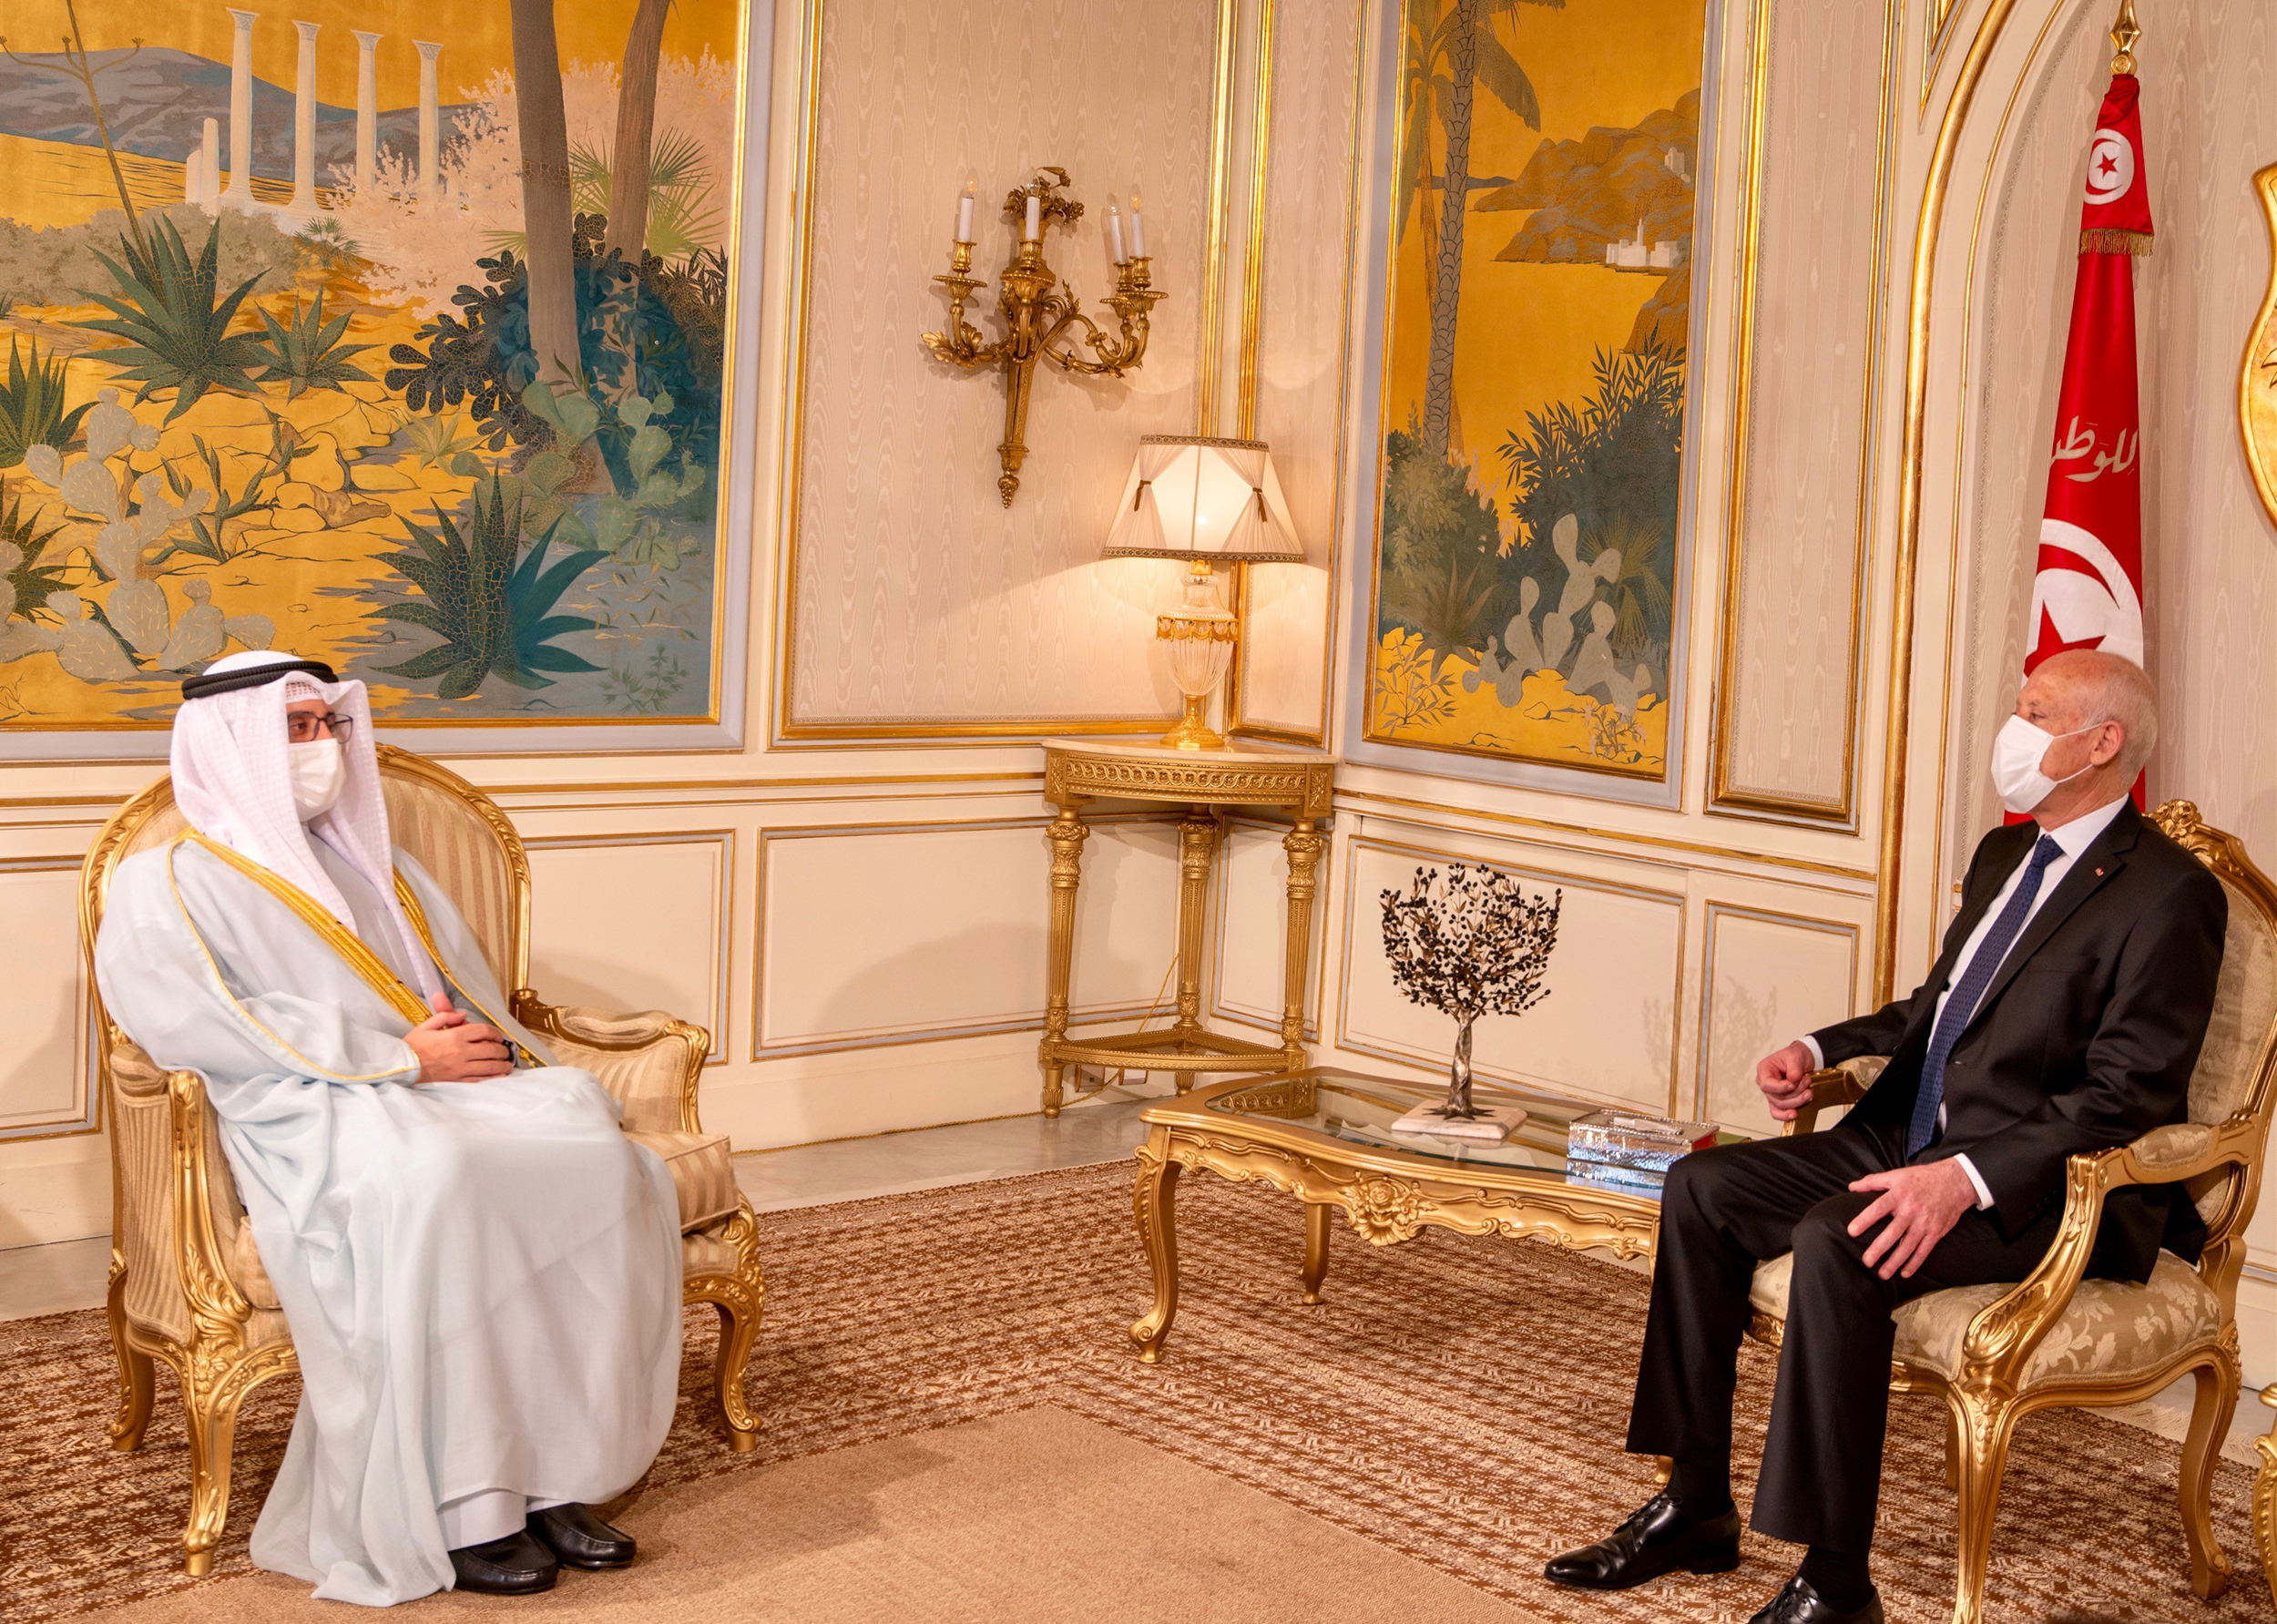 Kuwait's Foreign Minister met with Tunisian President